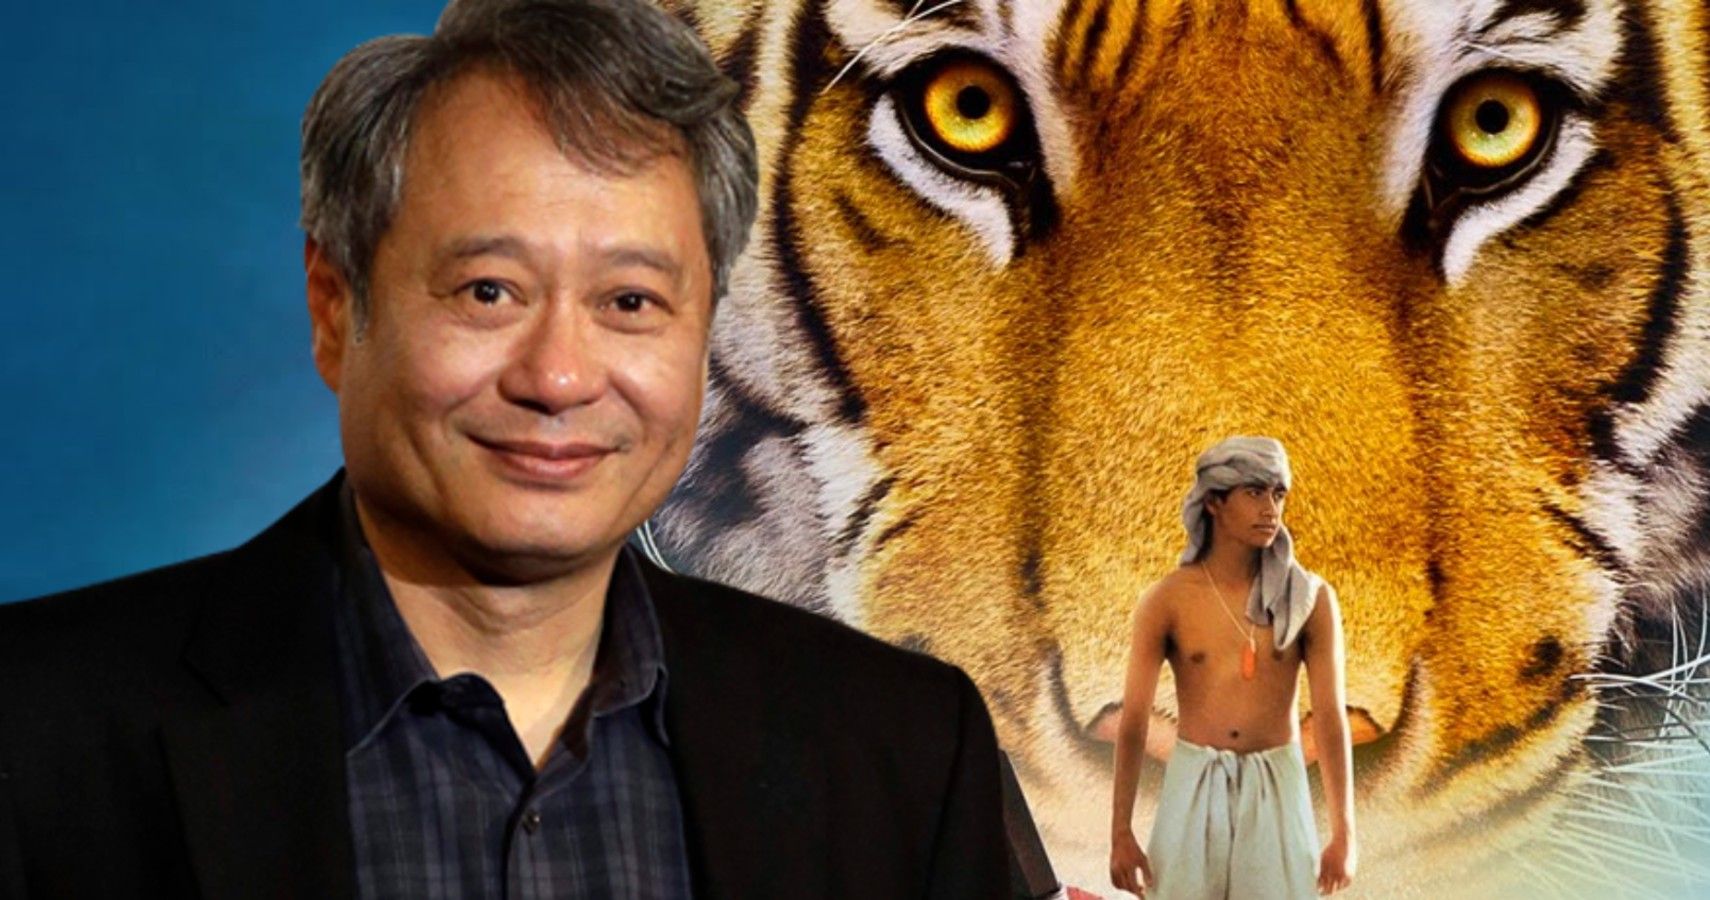 Life Of Pi: 10 Behind-The-Scenes Facts About Ang Lee's Movie